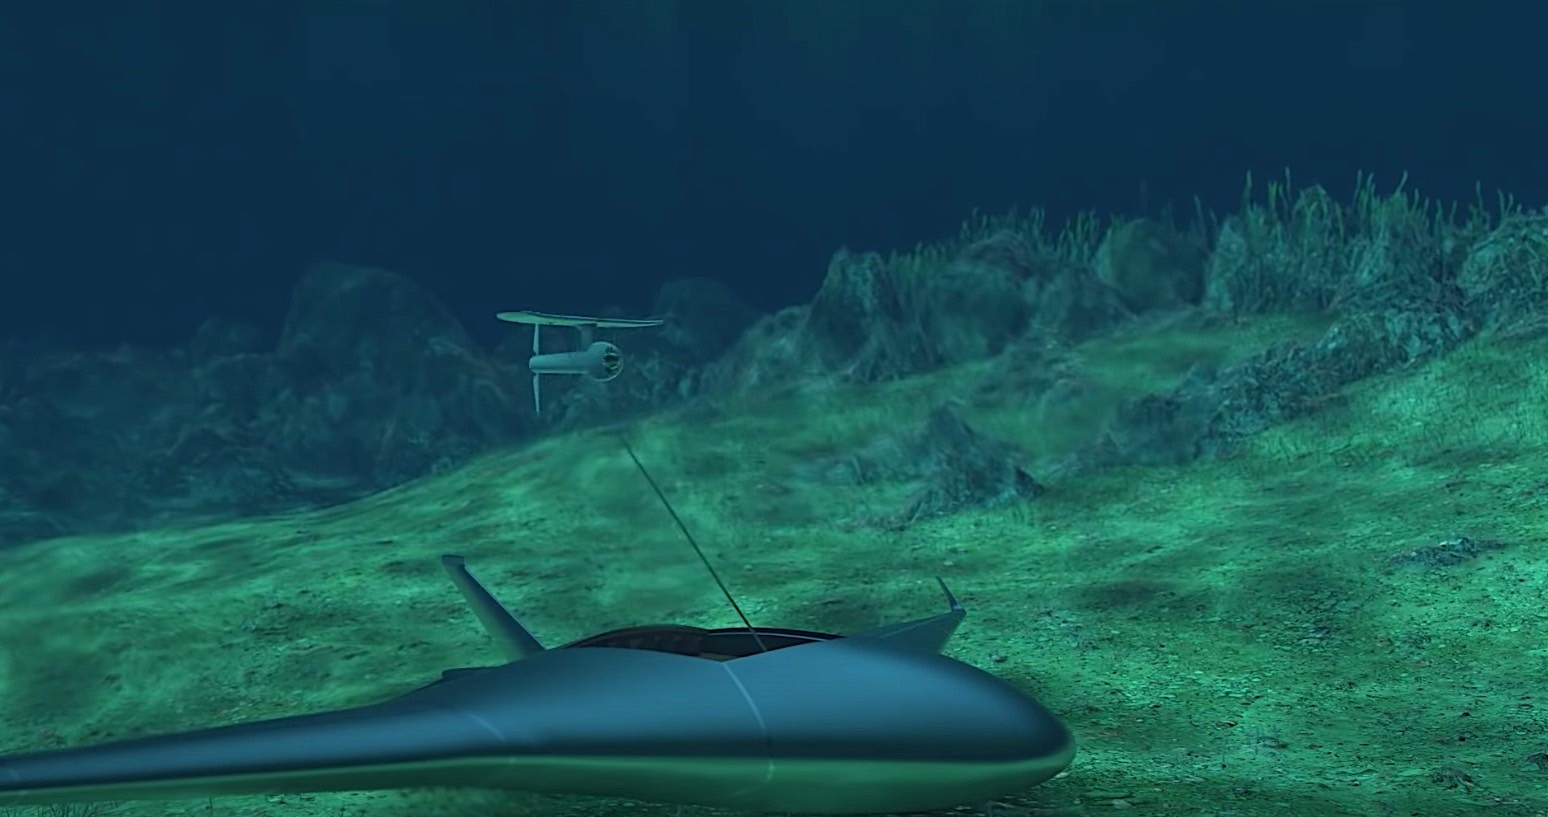 Darpas Manta Ray Underwater Drones Enter Phase 2 Demo Vehicles On The